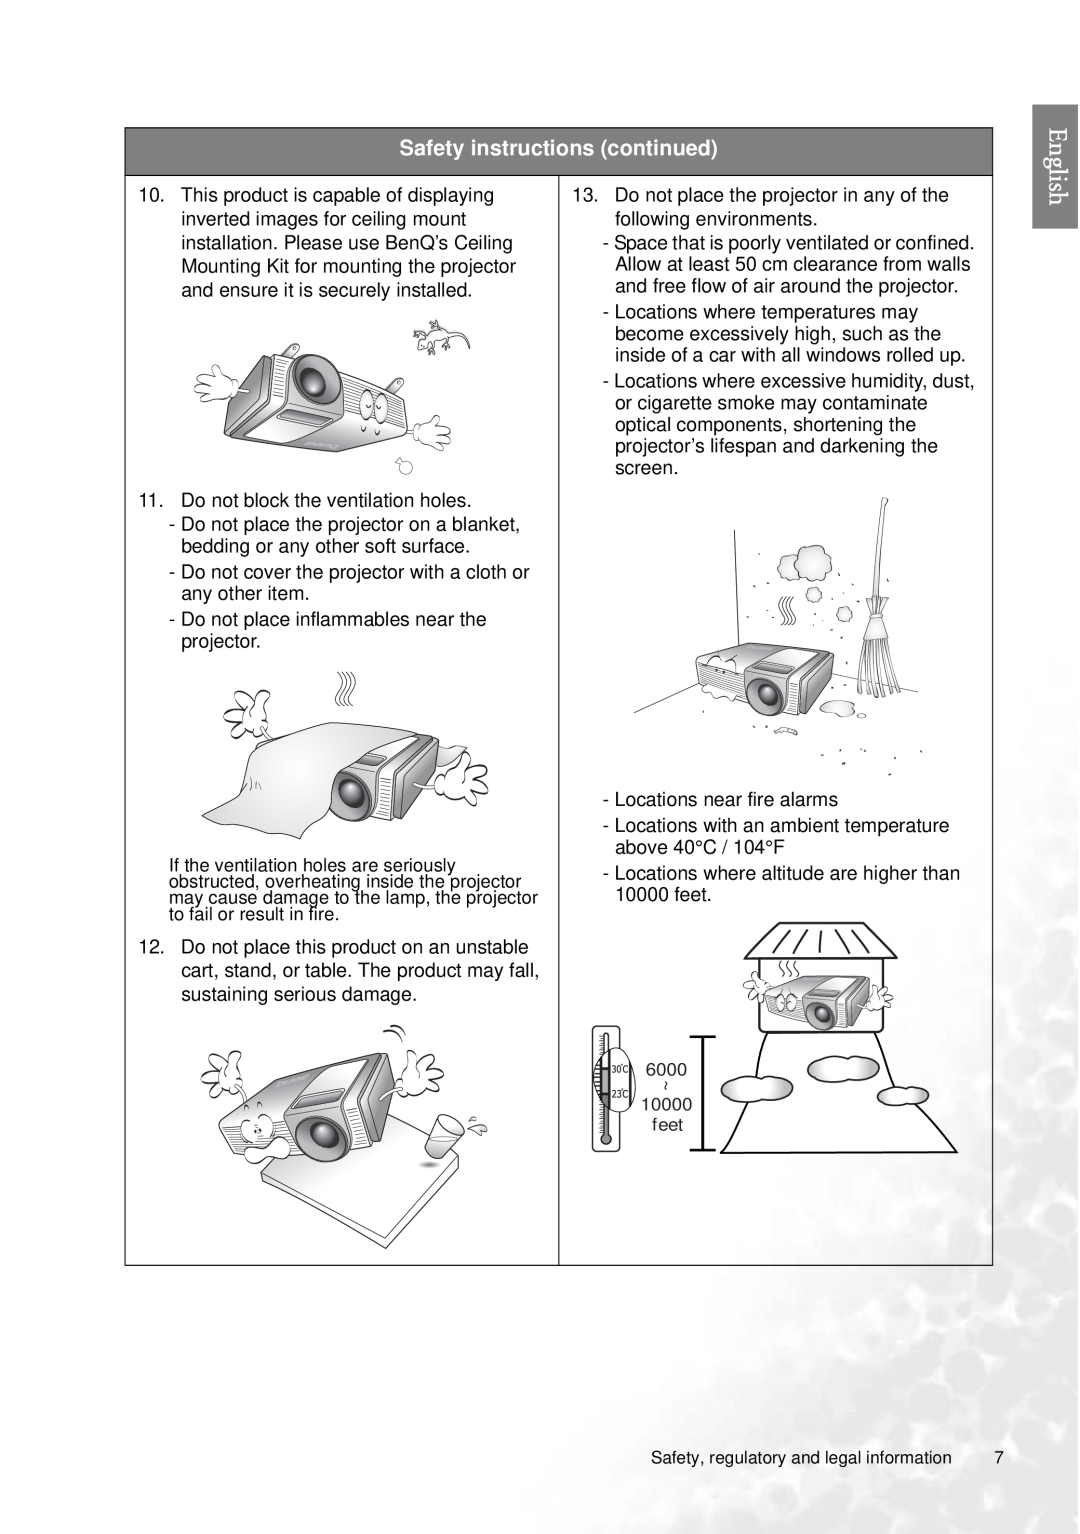 BenQ PE7700 user manual Safety instructions continued, Do not block the ventilation holes 